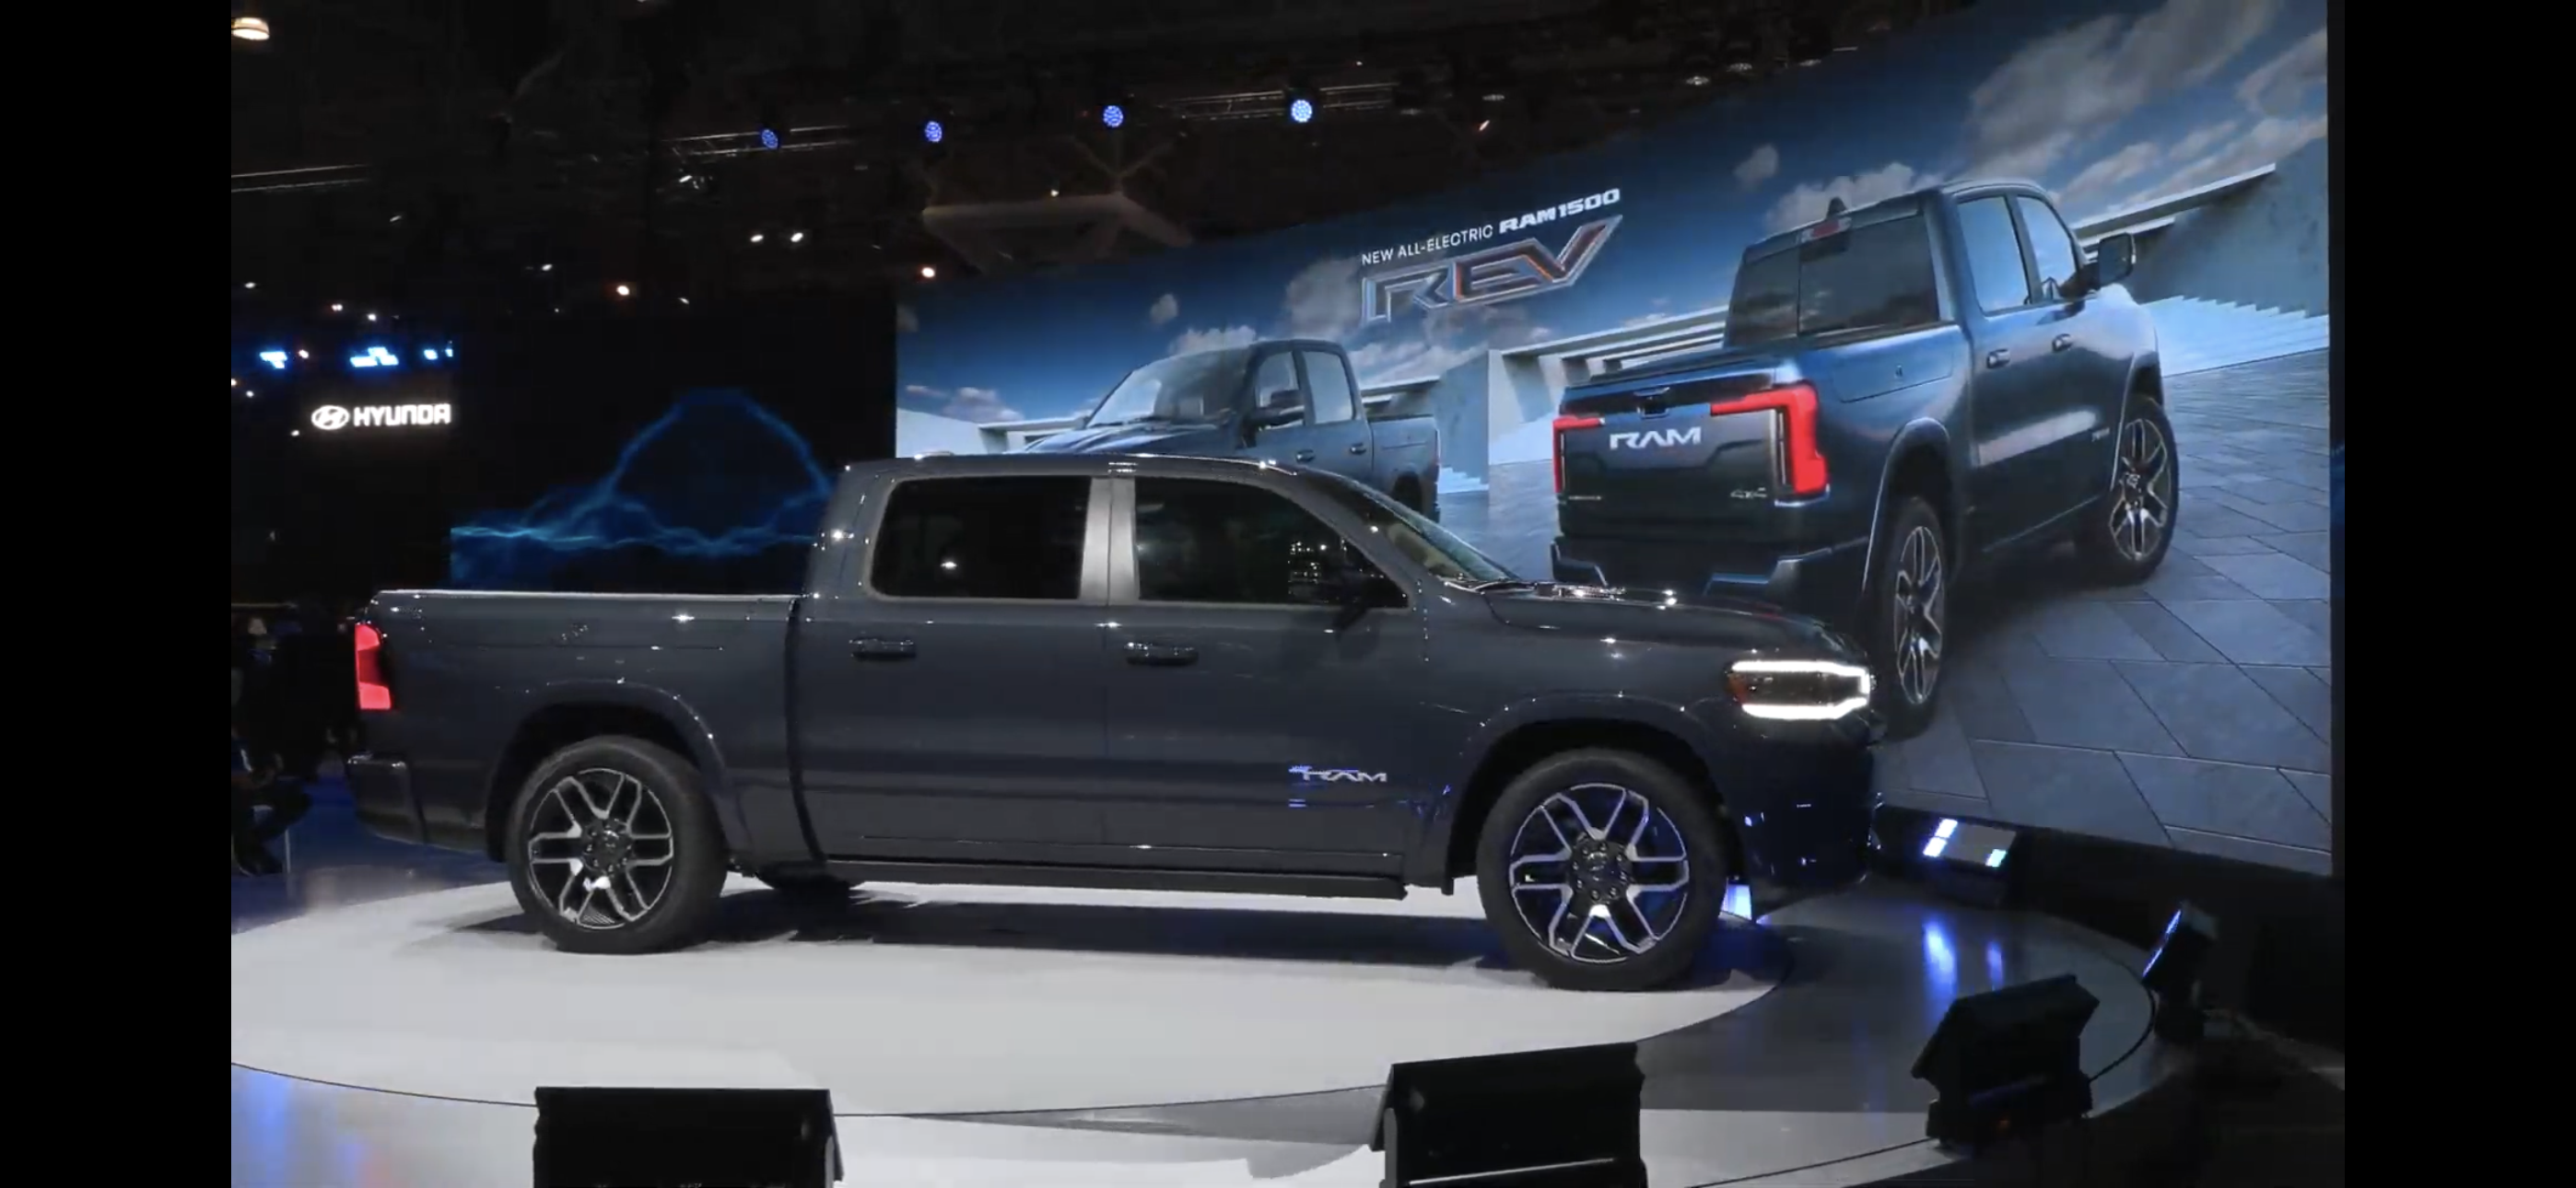 Ford F-150 Lightning Competition: Ram 1500 REV Specs Released - Range, Towing, Payload and Charge Time Info IMG_1662